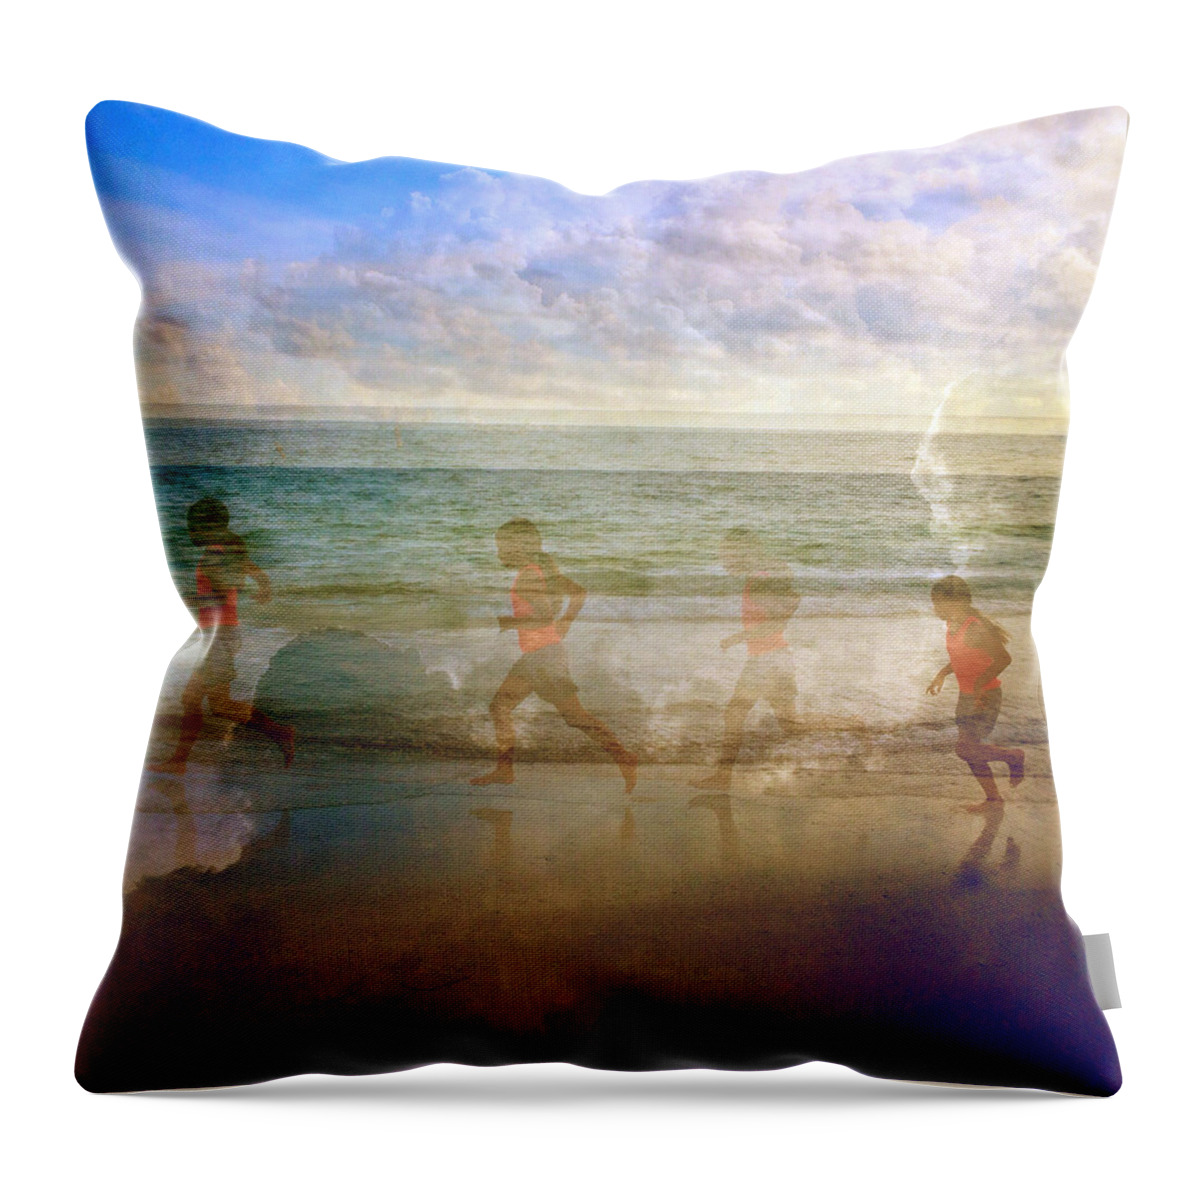 Running On The Beach Throw Pillow featuring the photograph Little Girl Running On The Beach by Skip Nall